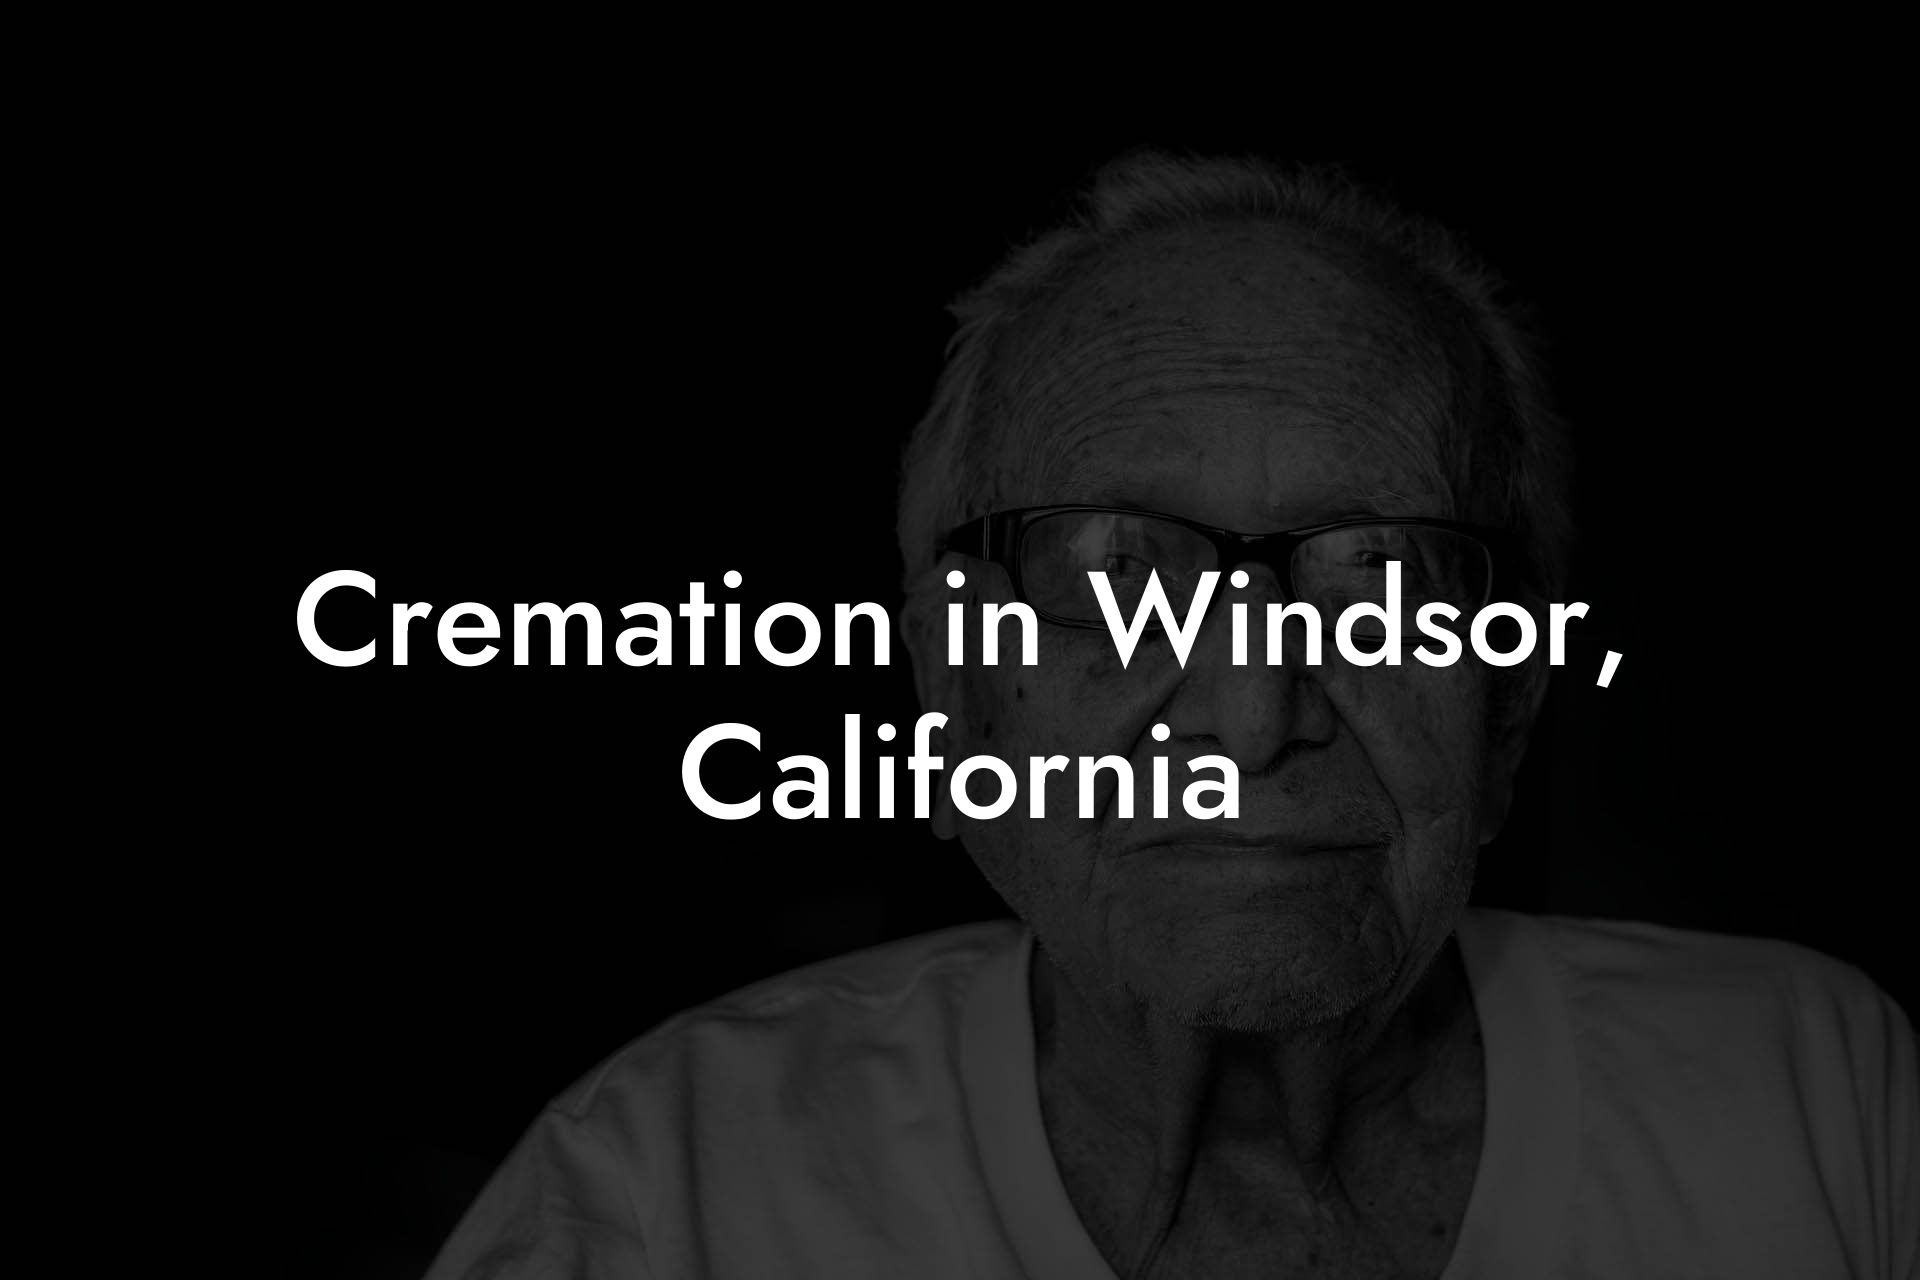 Cremation in Windsor, California